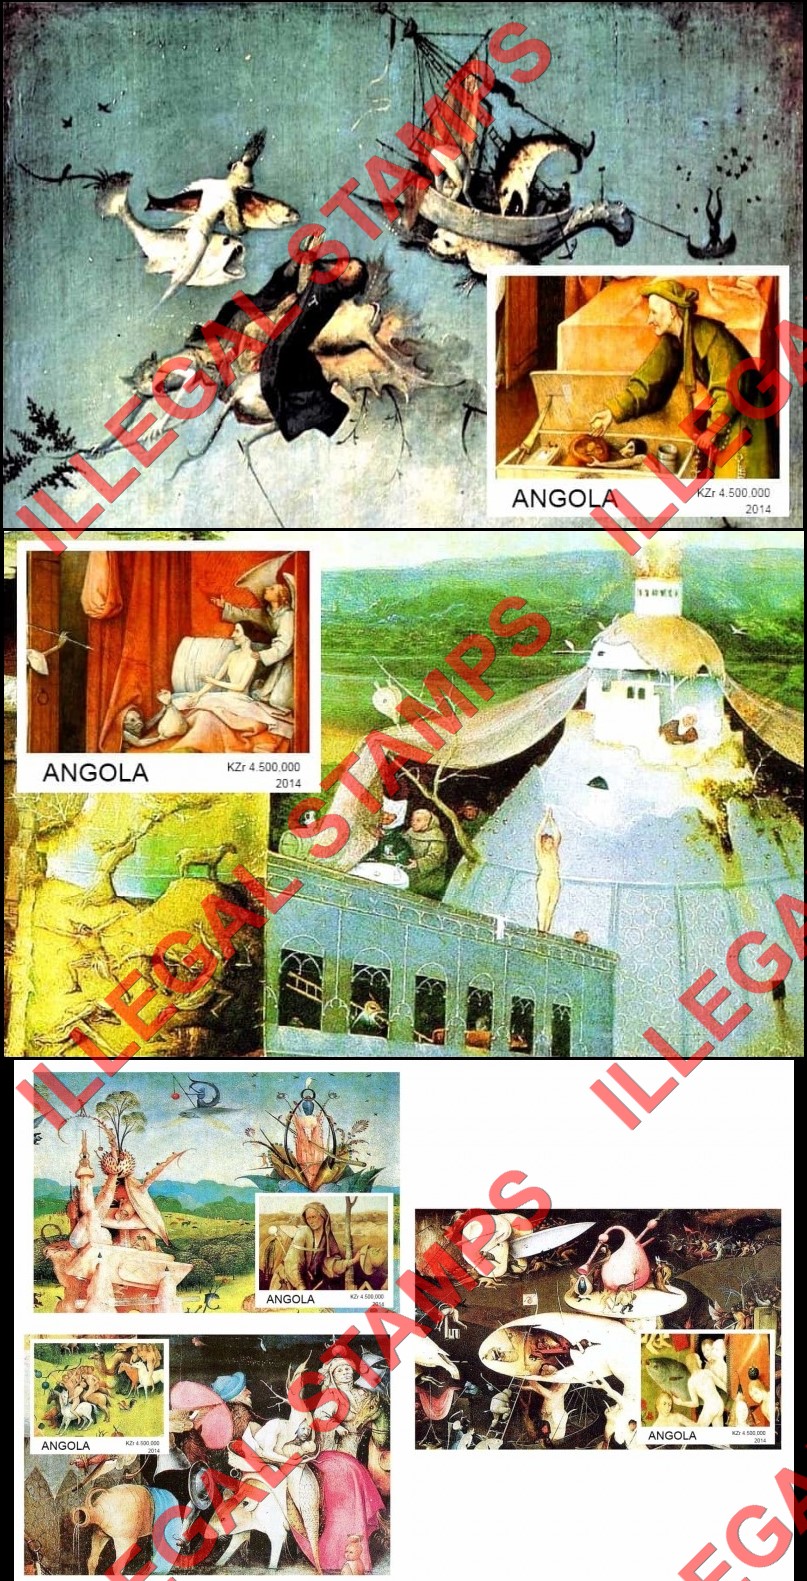 Angola 2014 Paintings by Hieronymus Bosch Illegal Stamp Souvenir Sheets of 1 (Part 1)